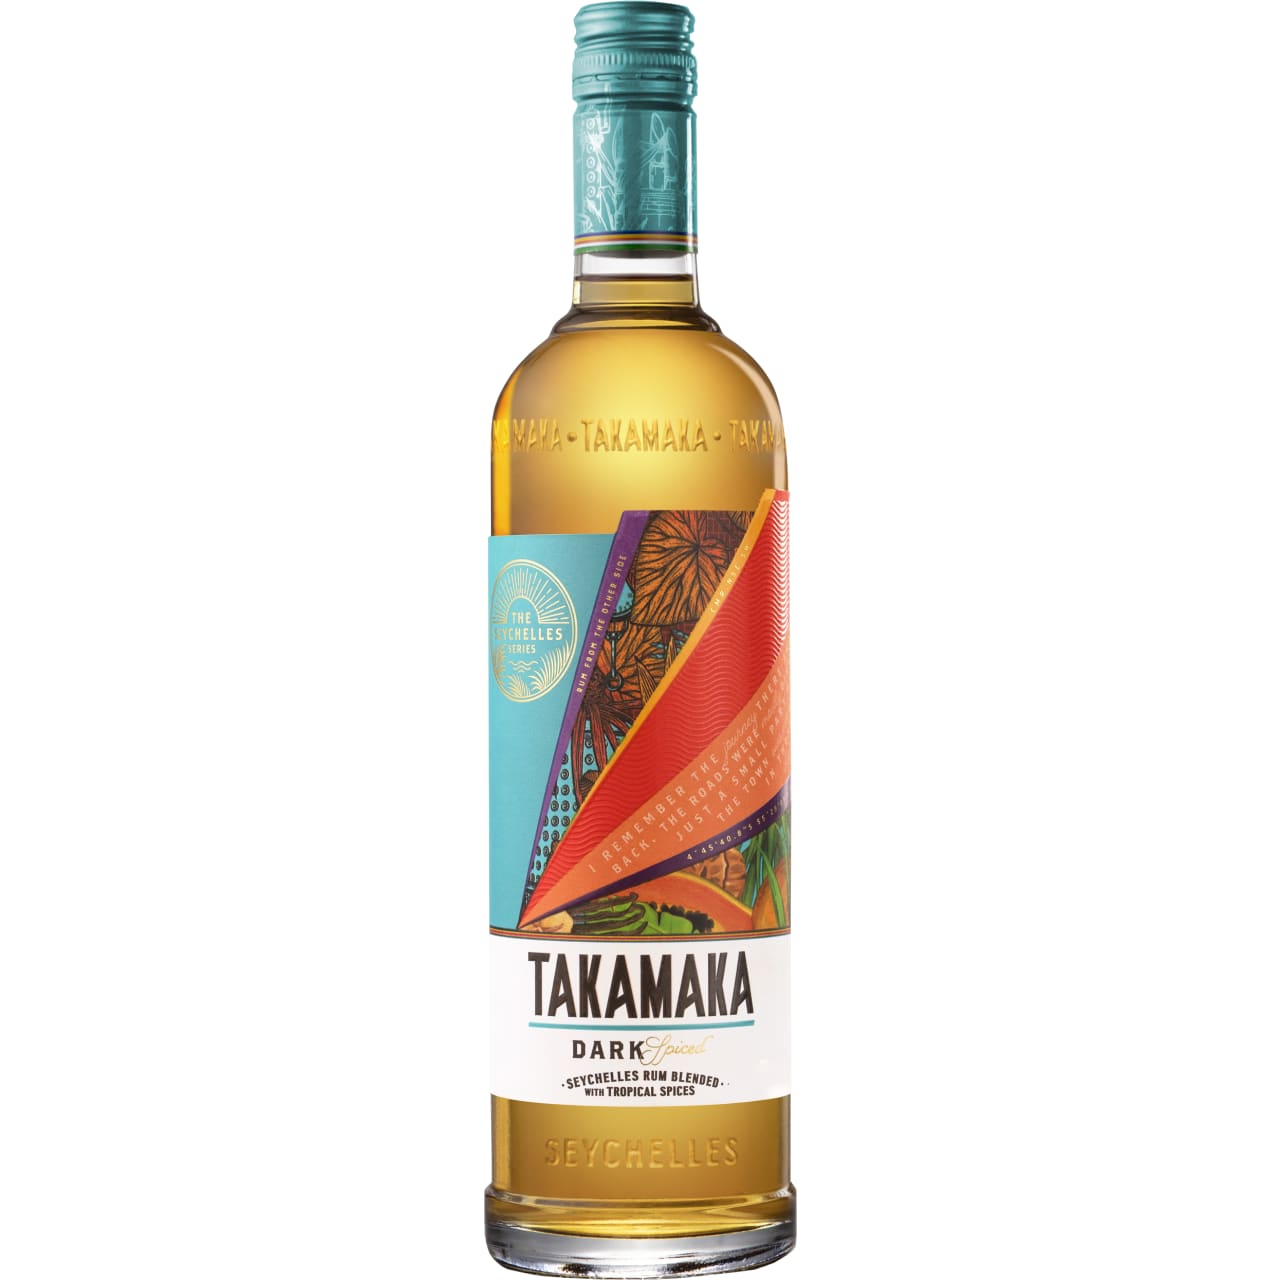 The original crowd-pleaser, Takamaka's flagship is a harmonious blend of selected dark rums, artesian waters and local spices.